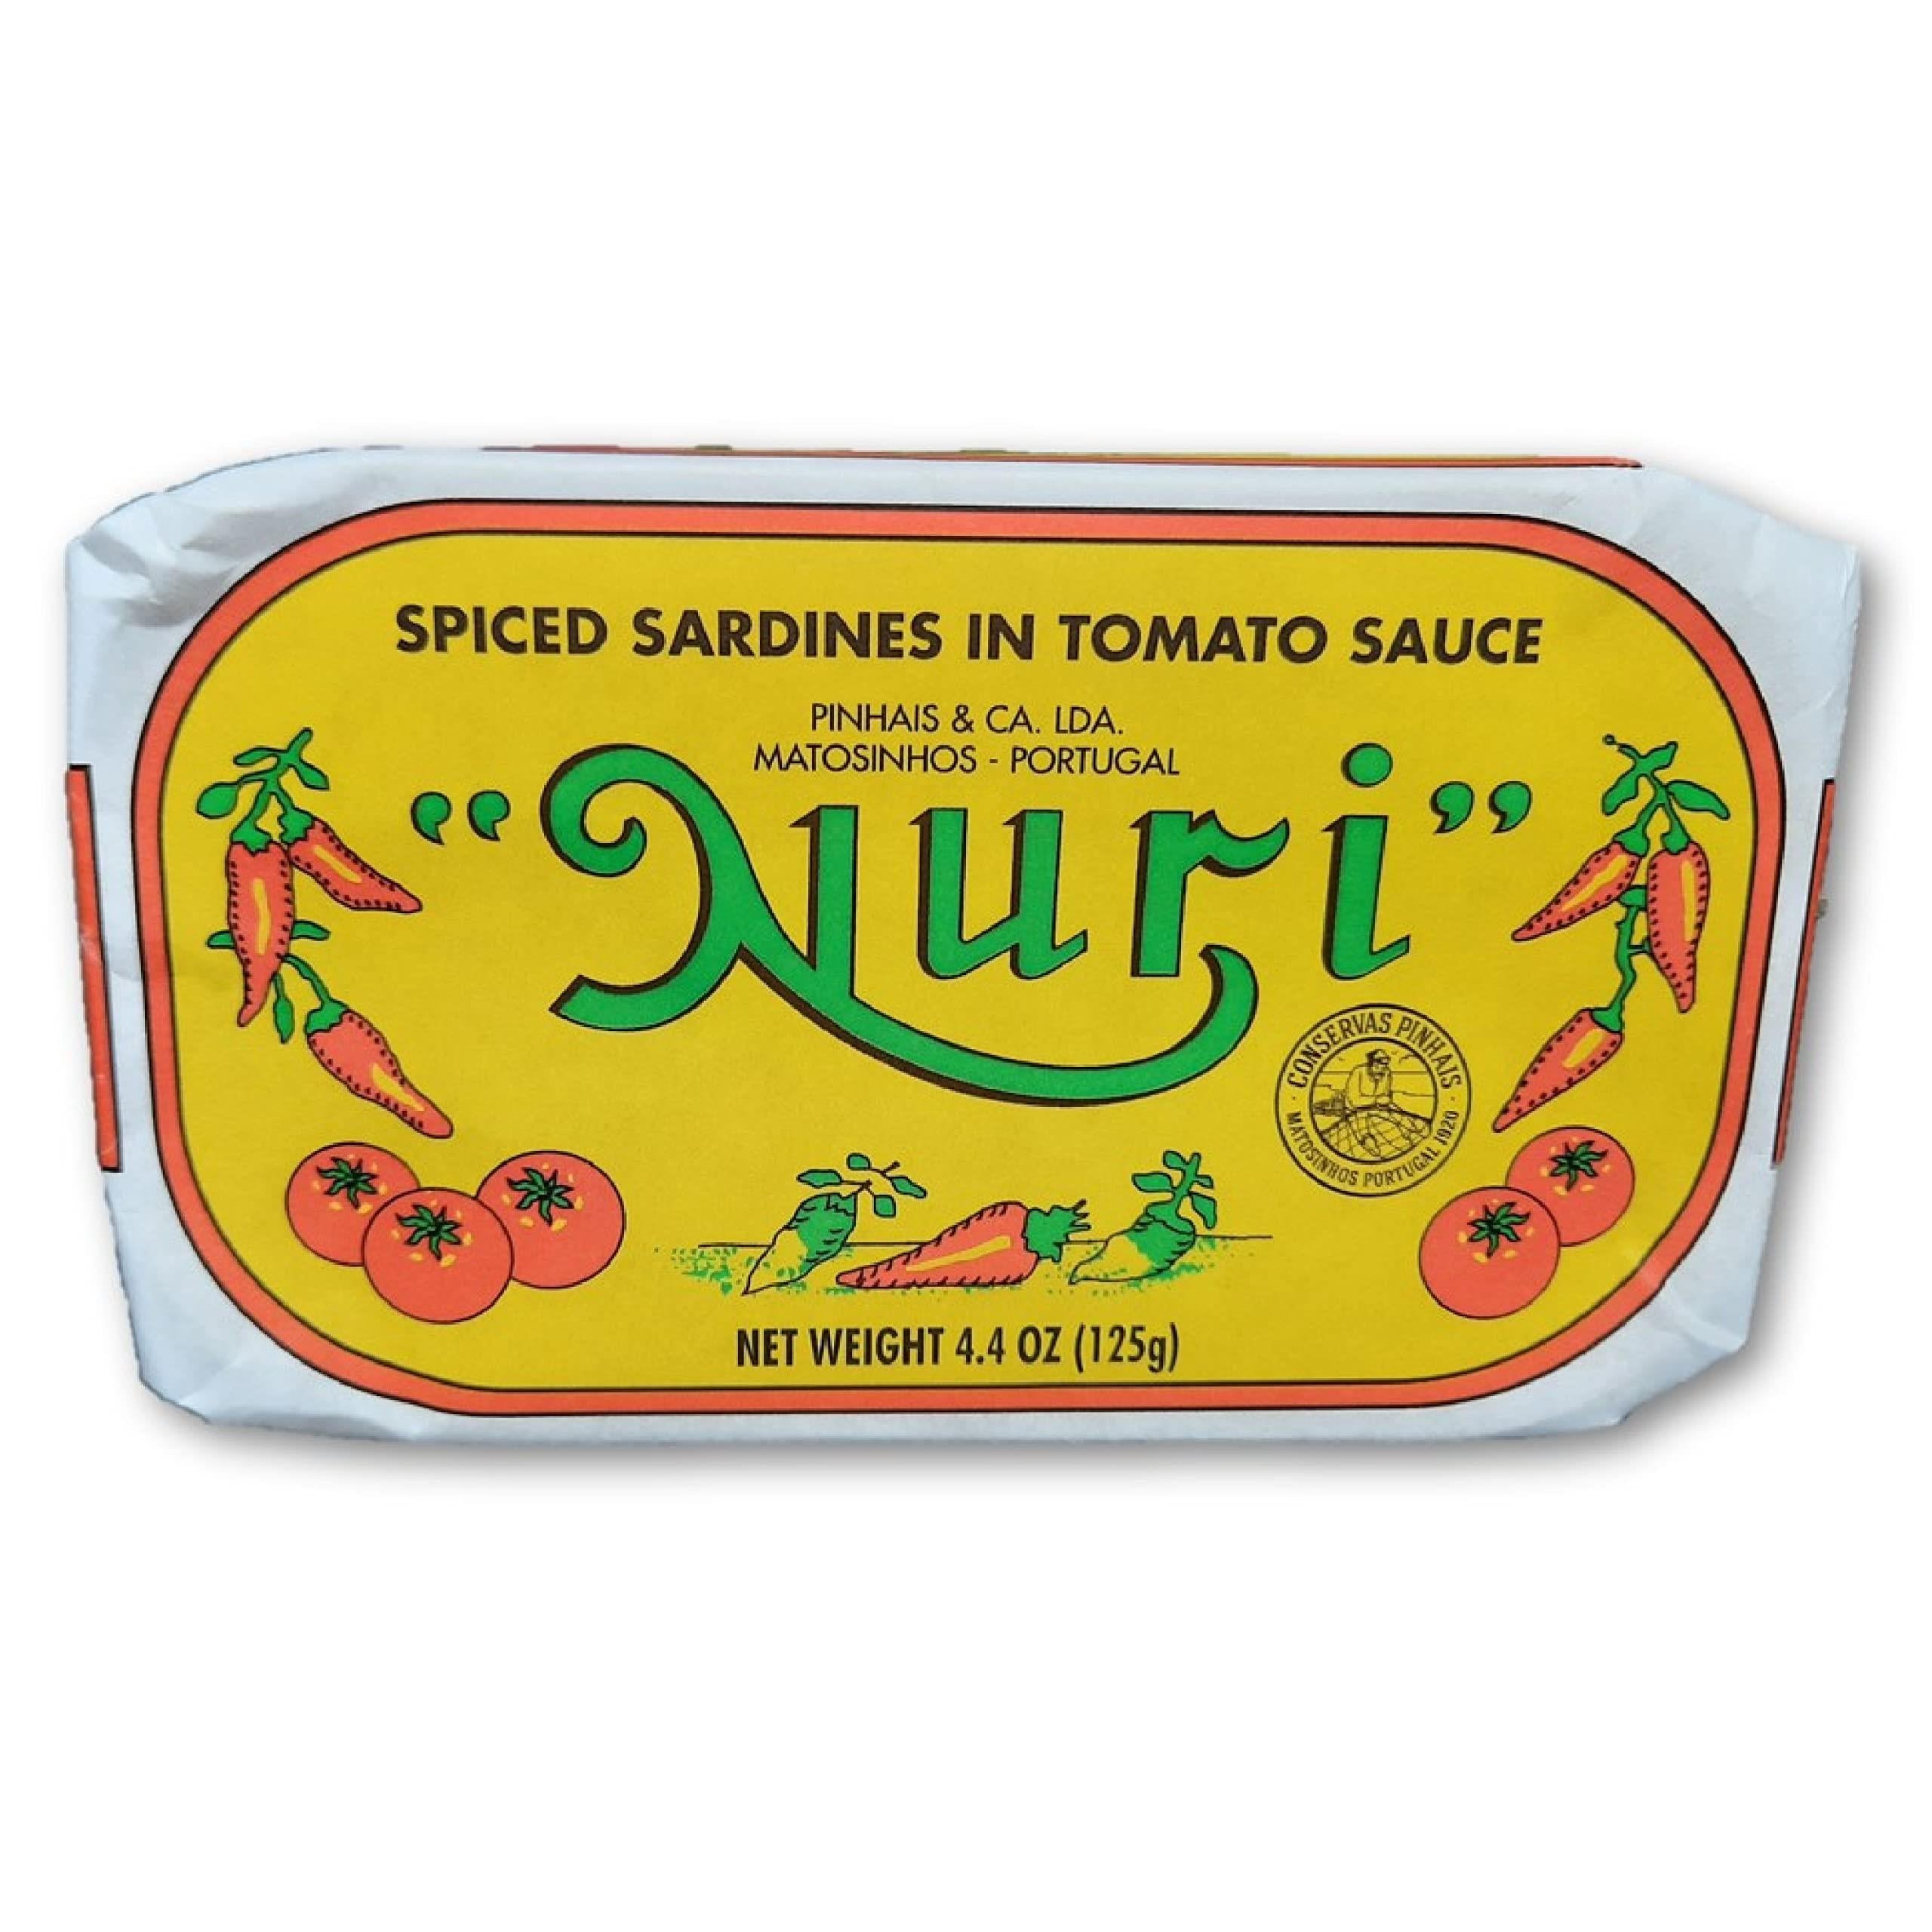 NURI Portuguese Sardines in Spiced Tomato Sauce - 10 Pack - (4.4 oz cans)